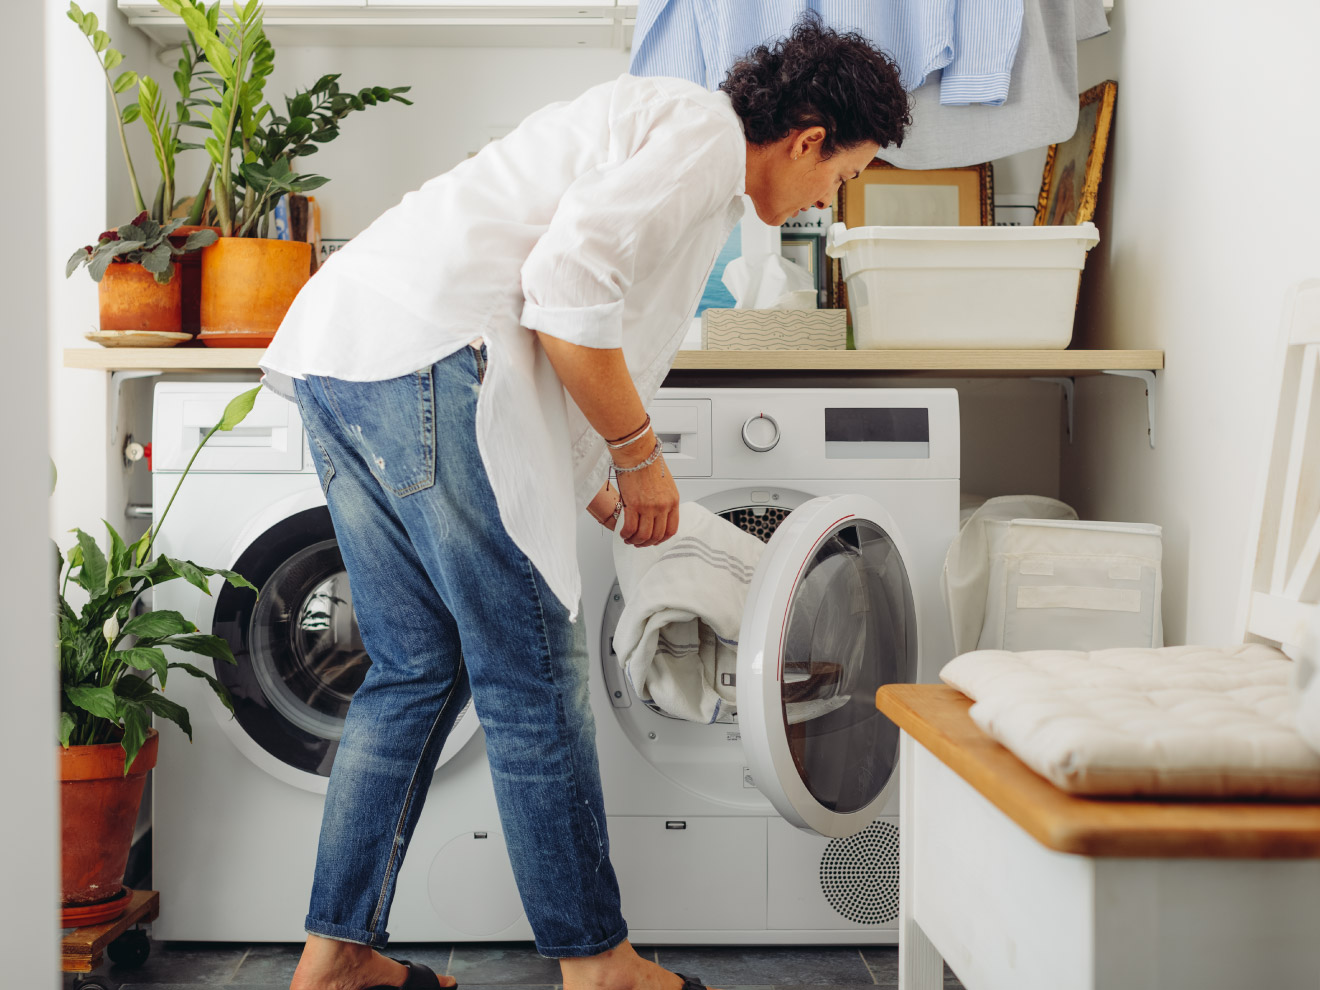 A woman puts a load of laundry in the washing machine. Adding baking soda helps her clothes come out clean and fresh!